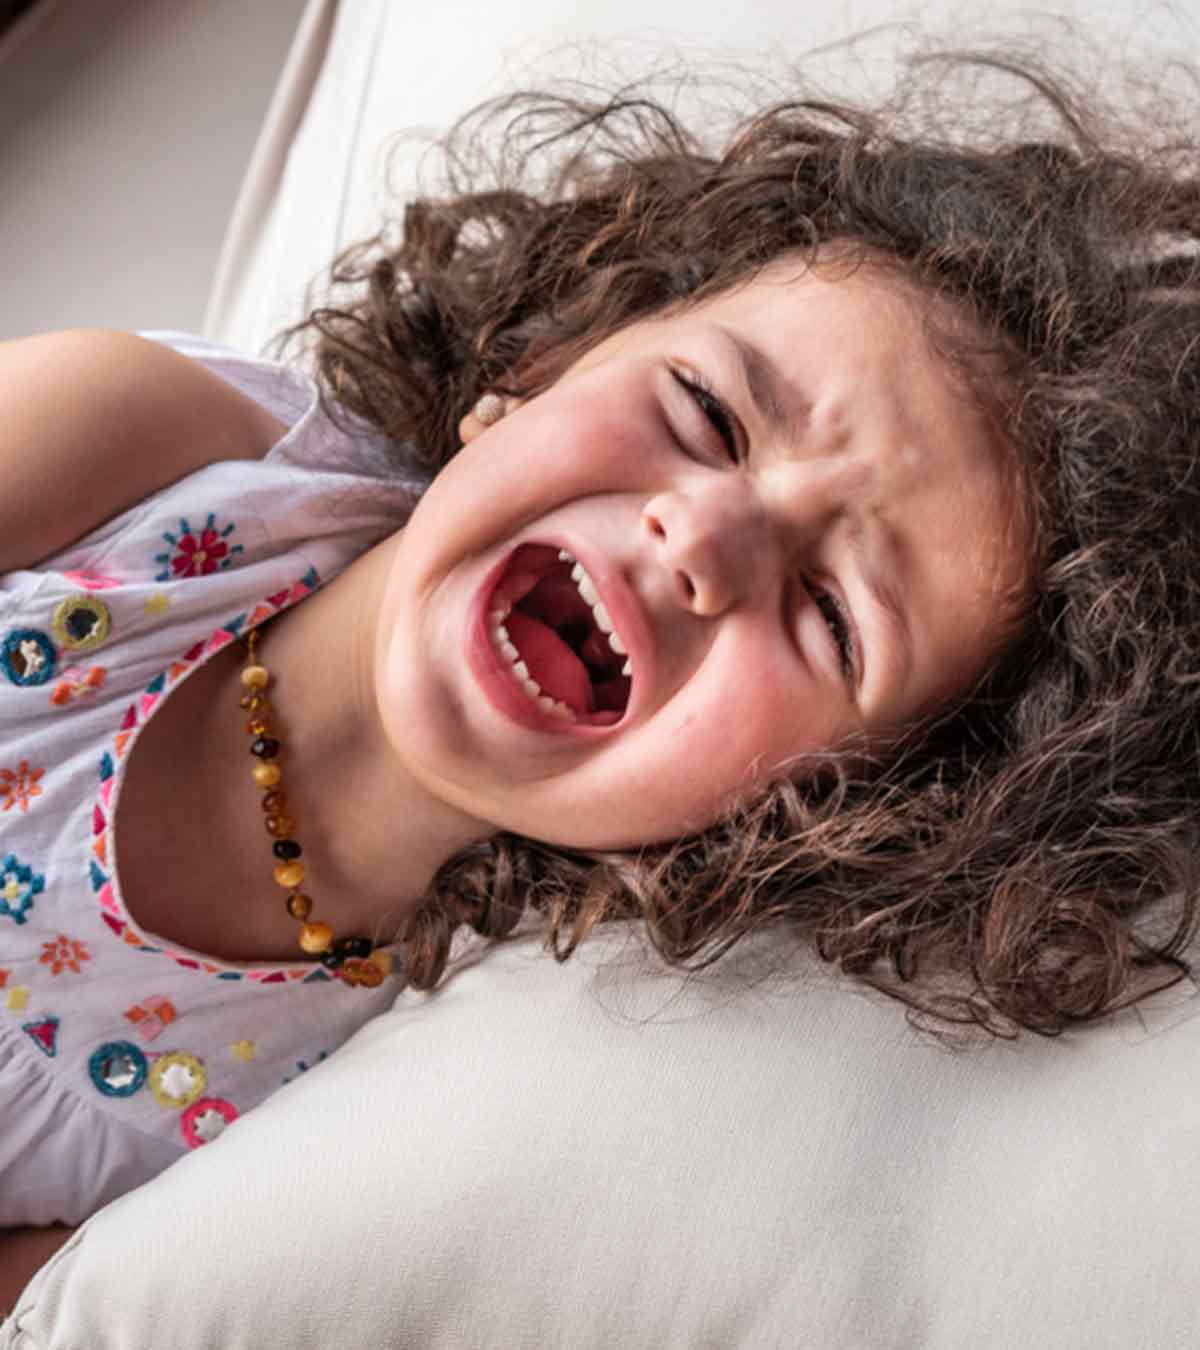 Do We Need To Be More Tolerant Of Children’s Mood Swings?